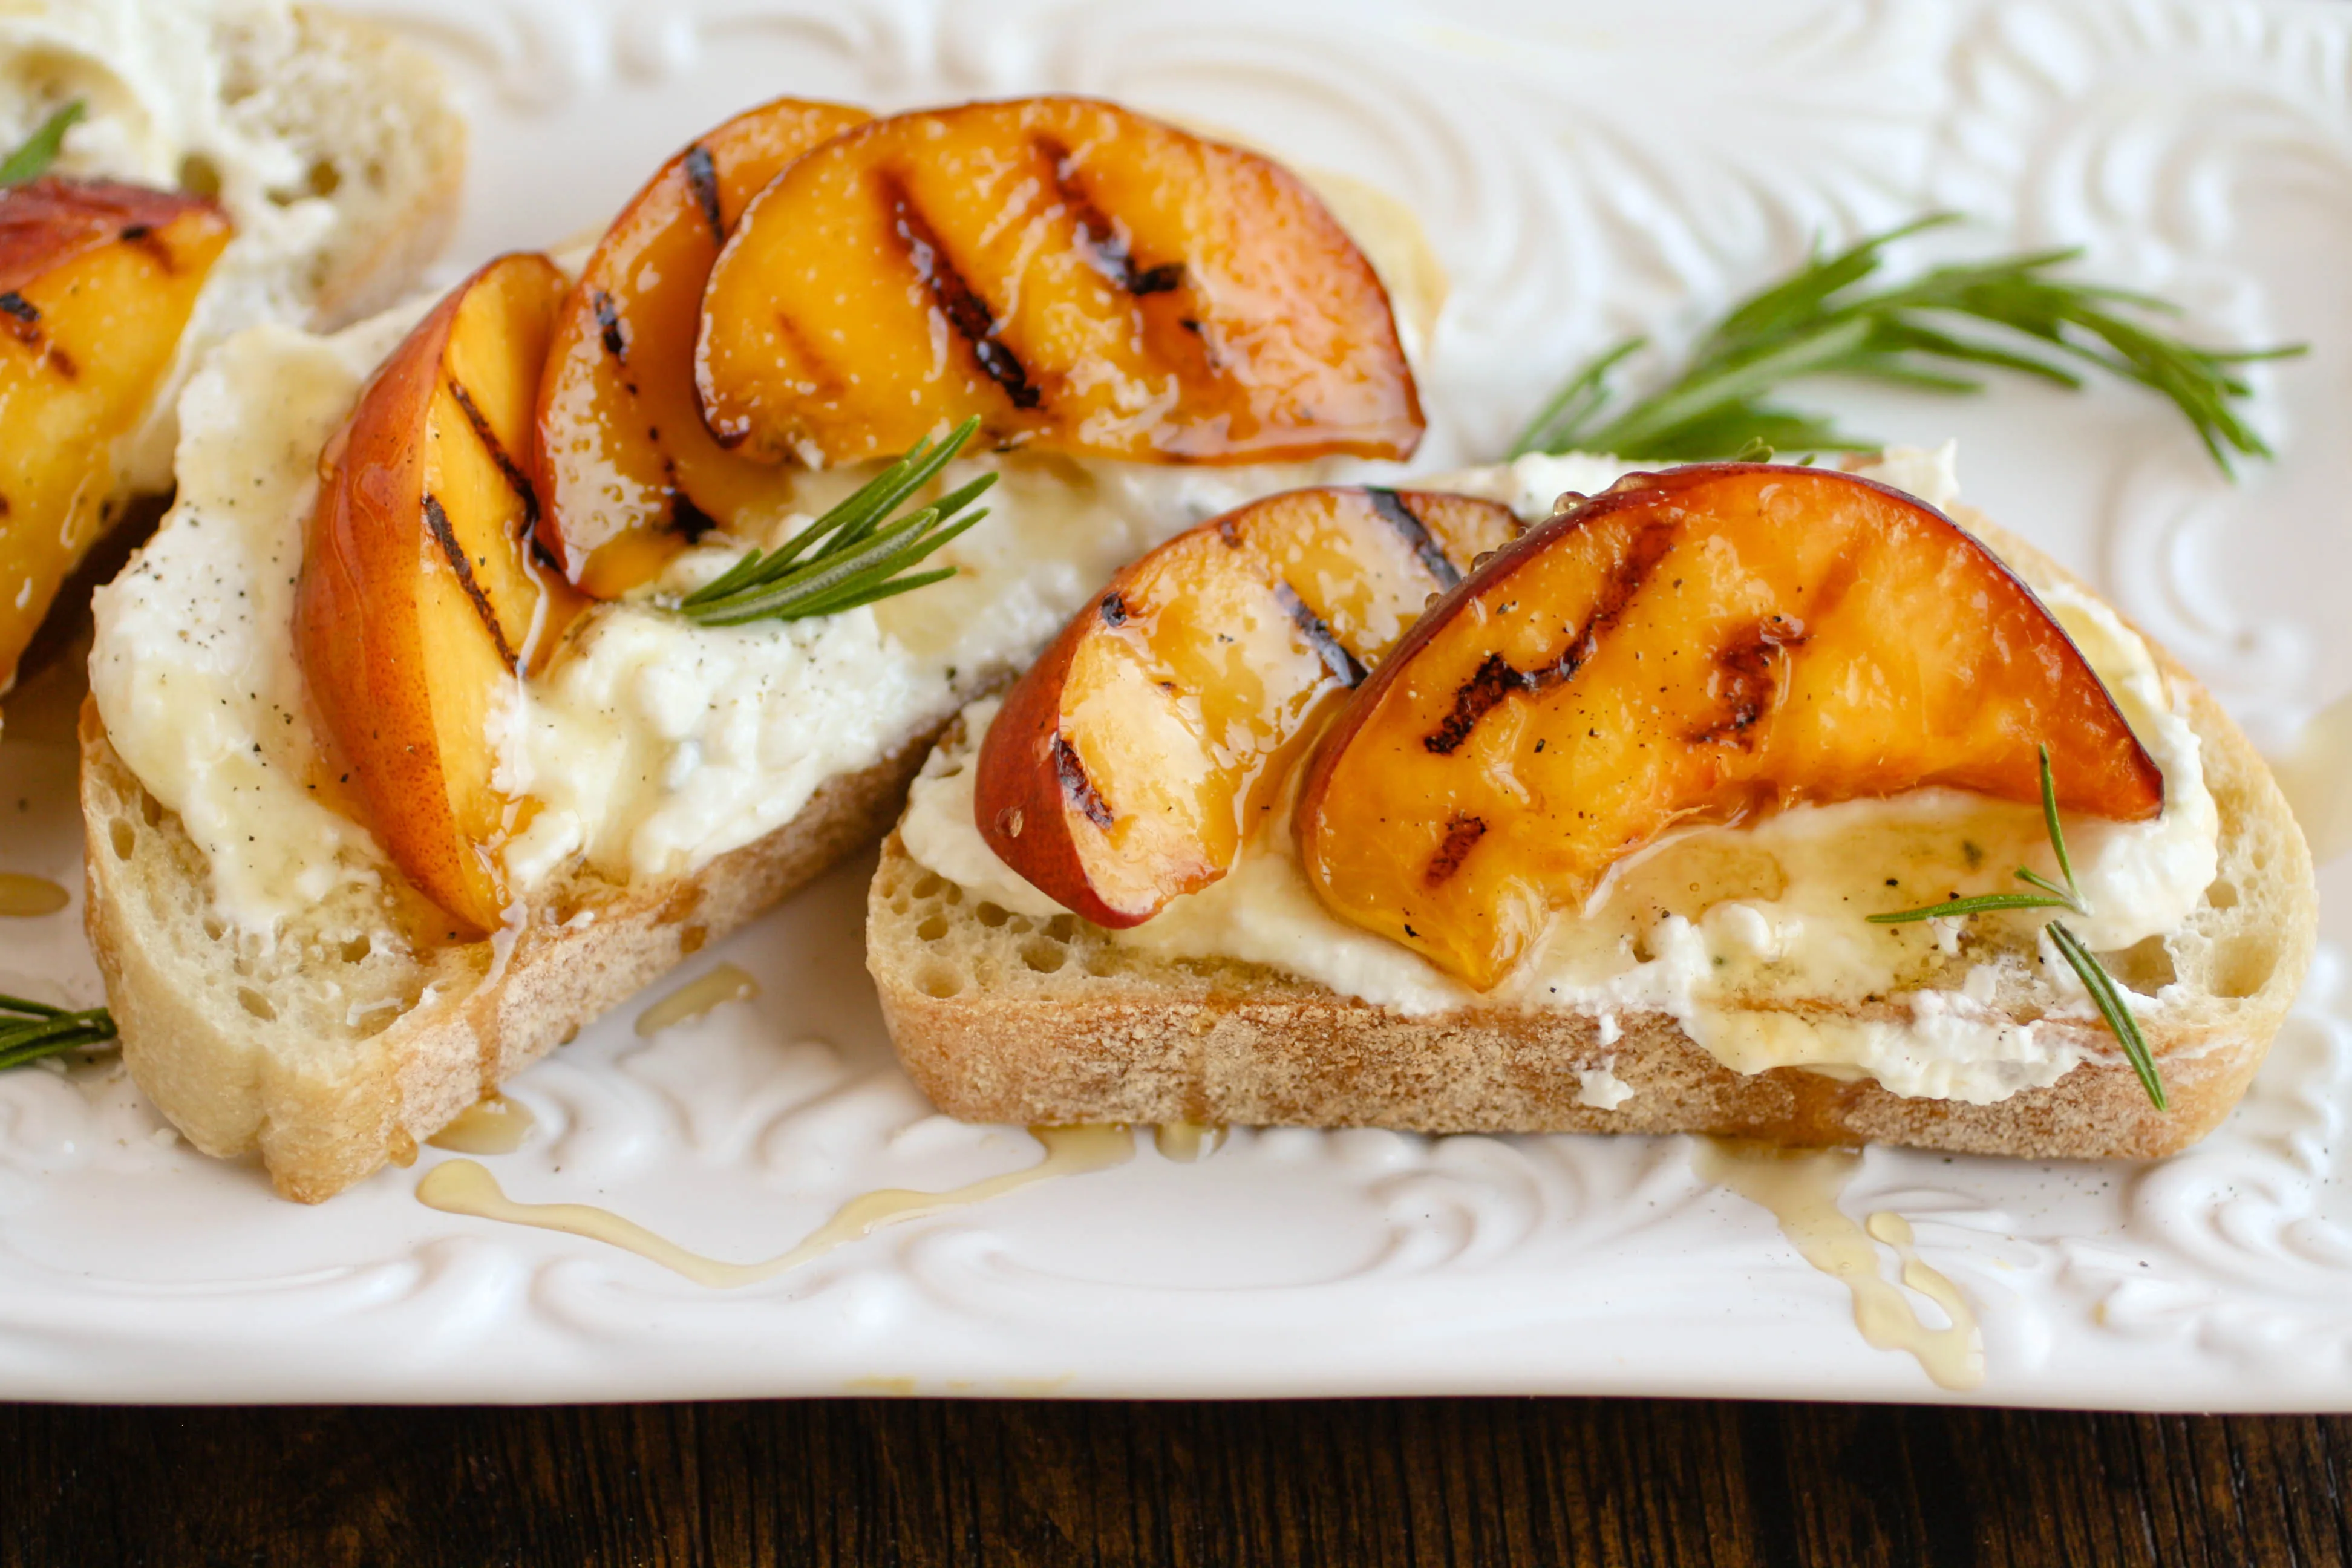 Rosemary Whipped Feta with Grilled Peaches and Honey is the cheese spread you need in your life! This makes a great appetizer for any get together.